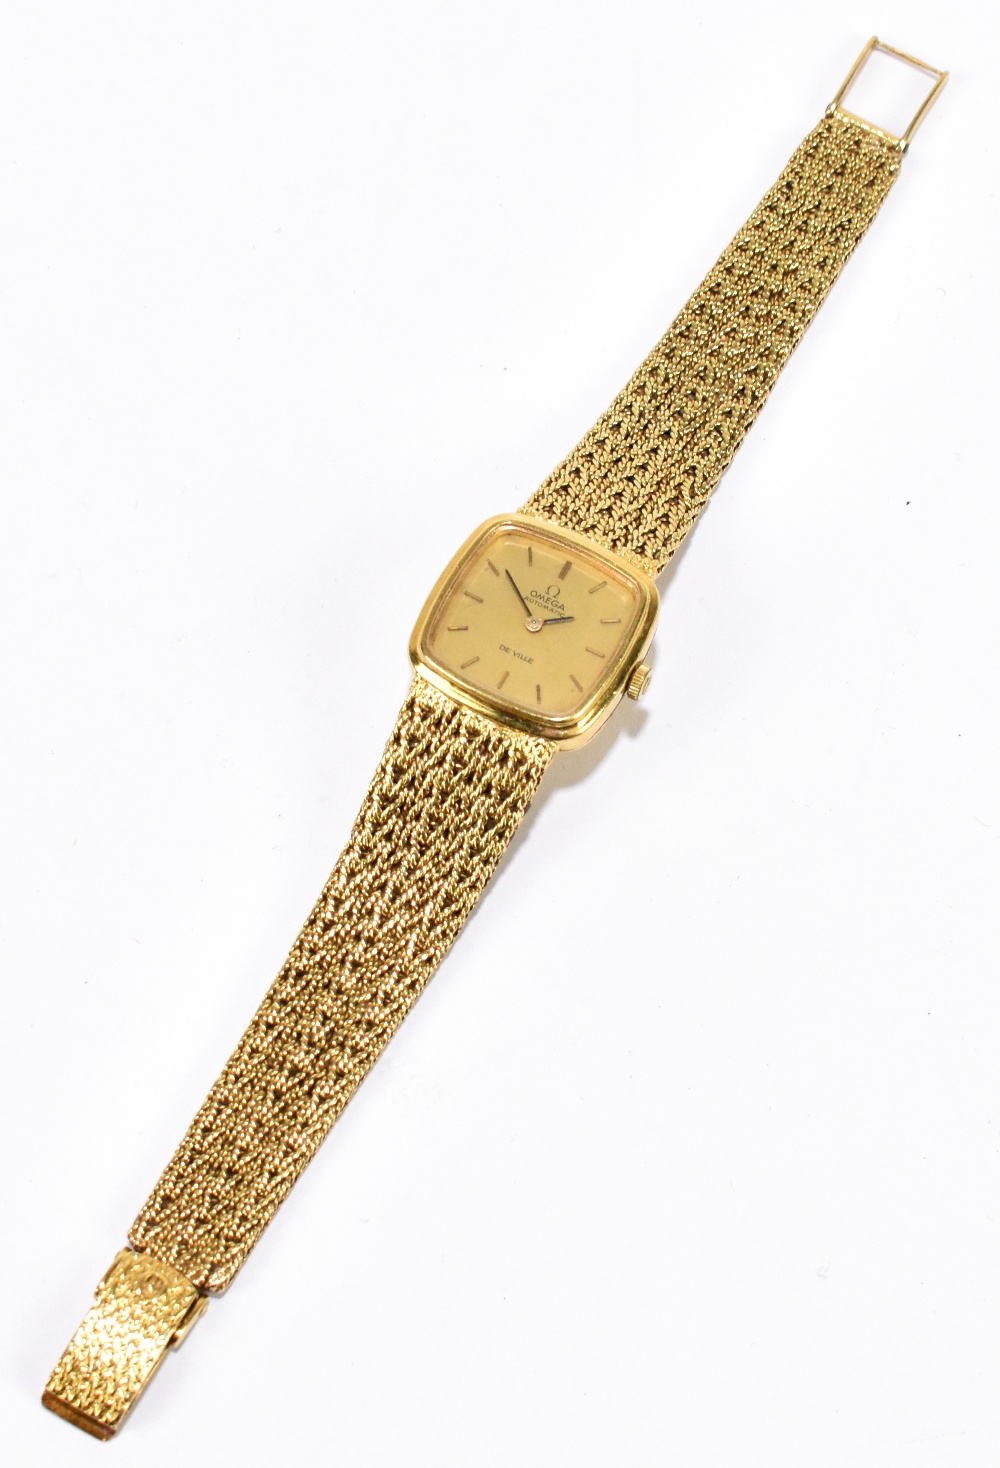 OMEGA; a lady's 18ct yellow gold De Ville wristwatch with integral textured bracelet and rounded